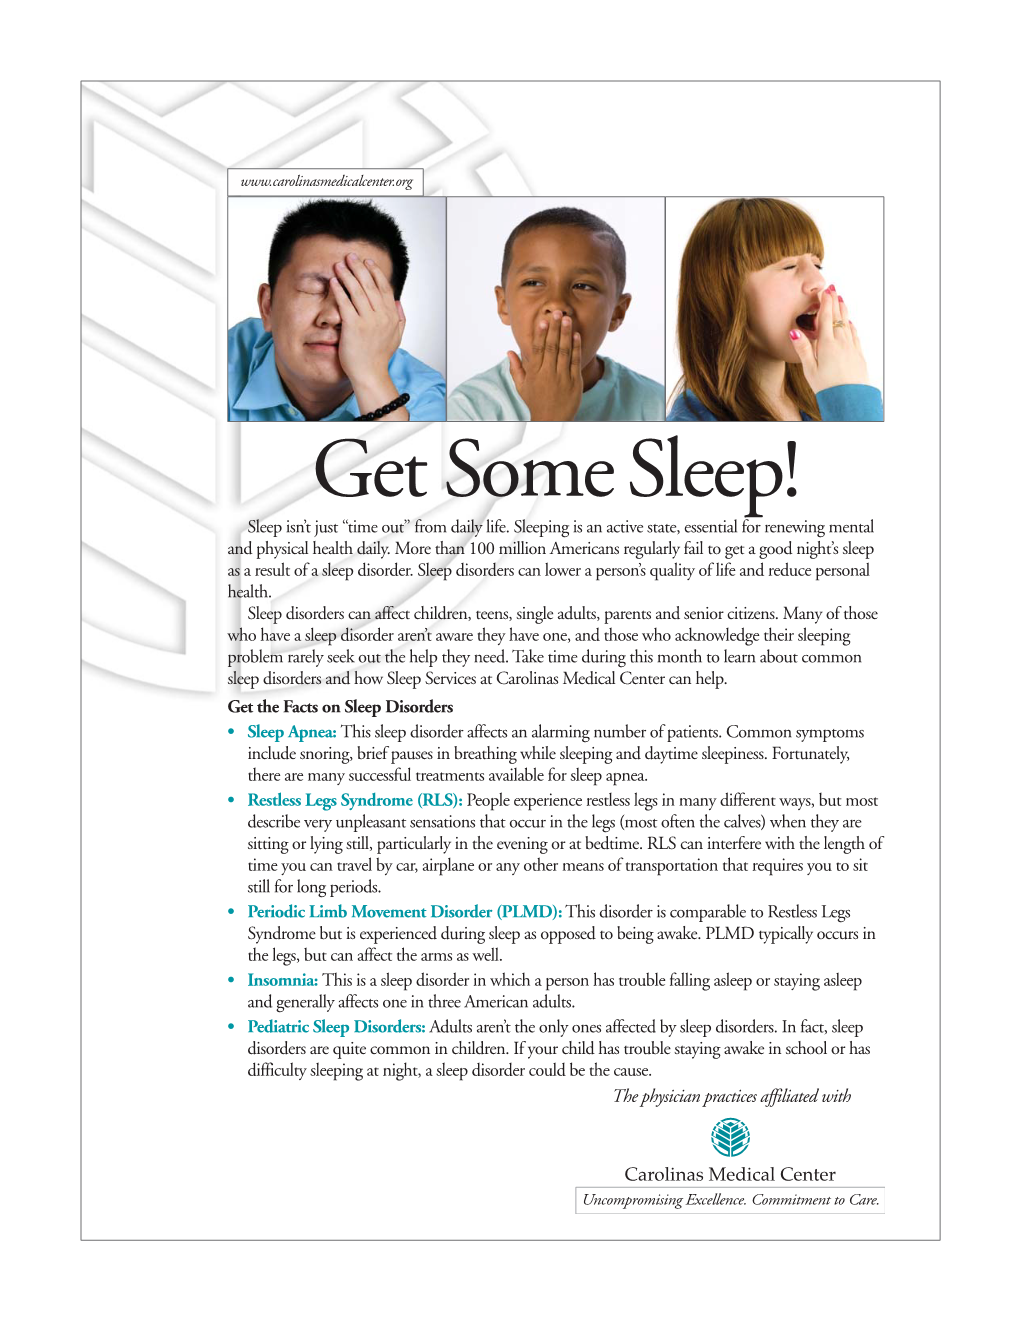 Get Some Sleep! Sleep Isn’T Just “Time Out” from Daily Life